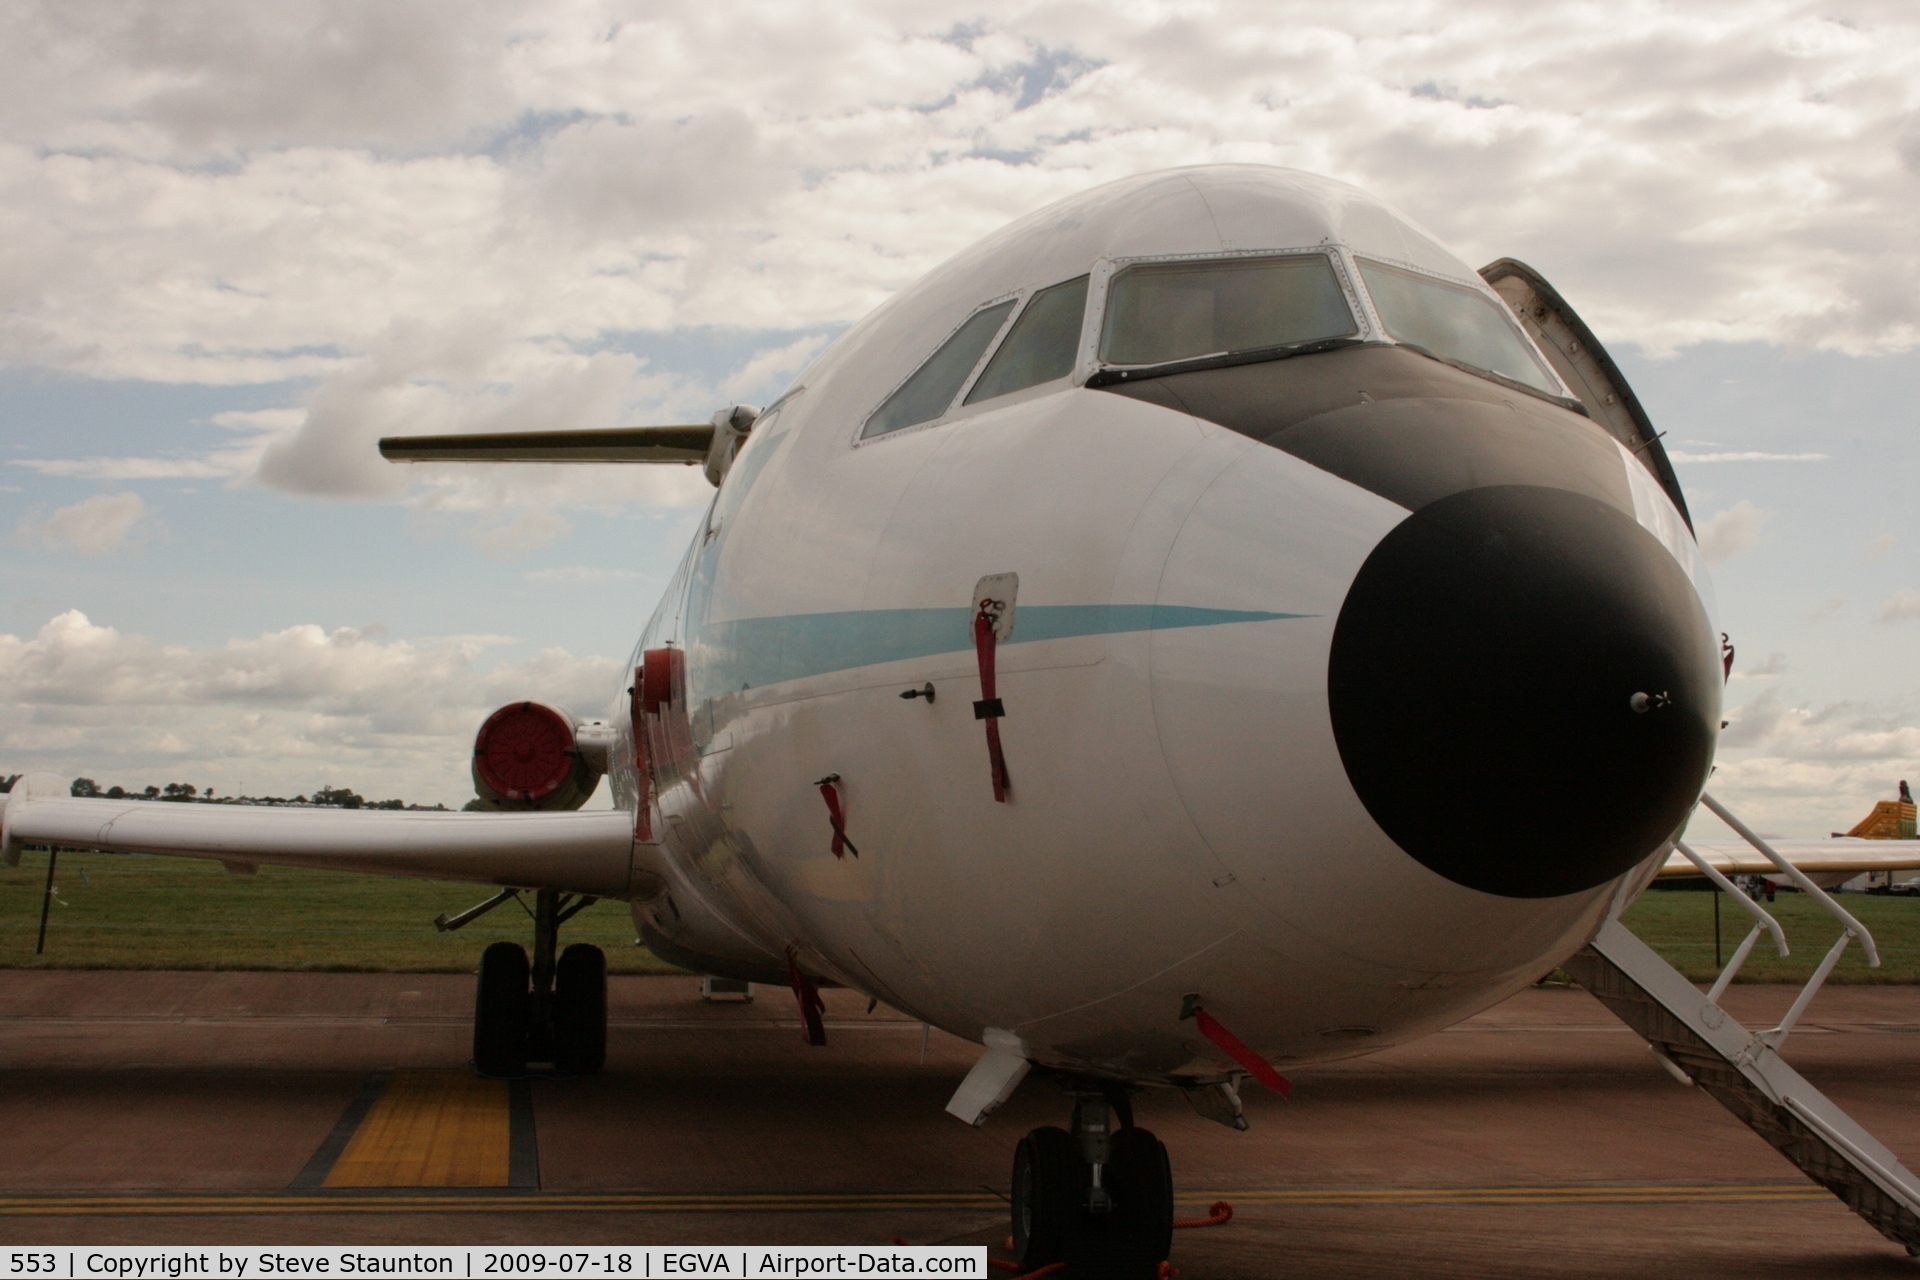 553, 1975 BAC 111-485GD One-Eleven C/N BAC.251, Taken at the Royal International Air Tattoo 2009